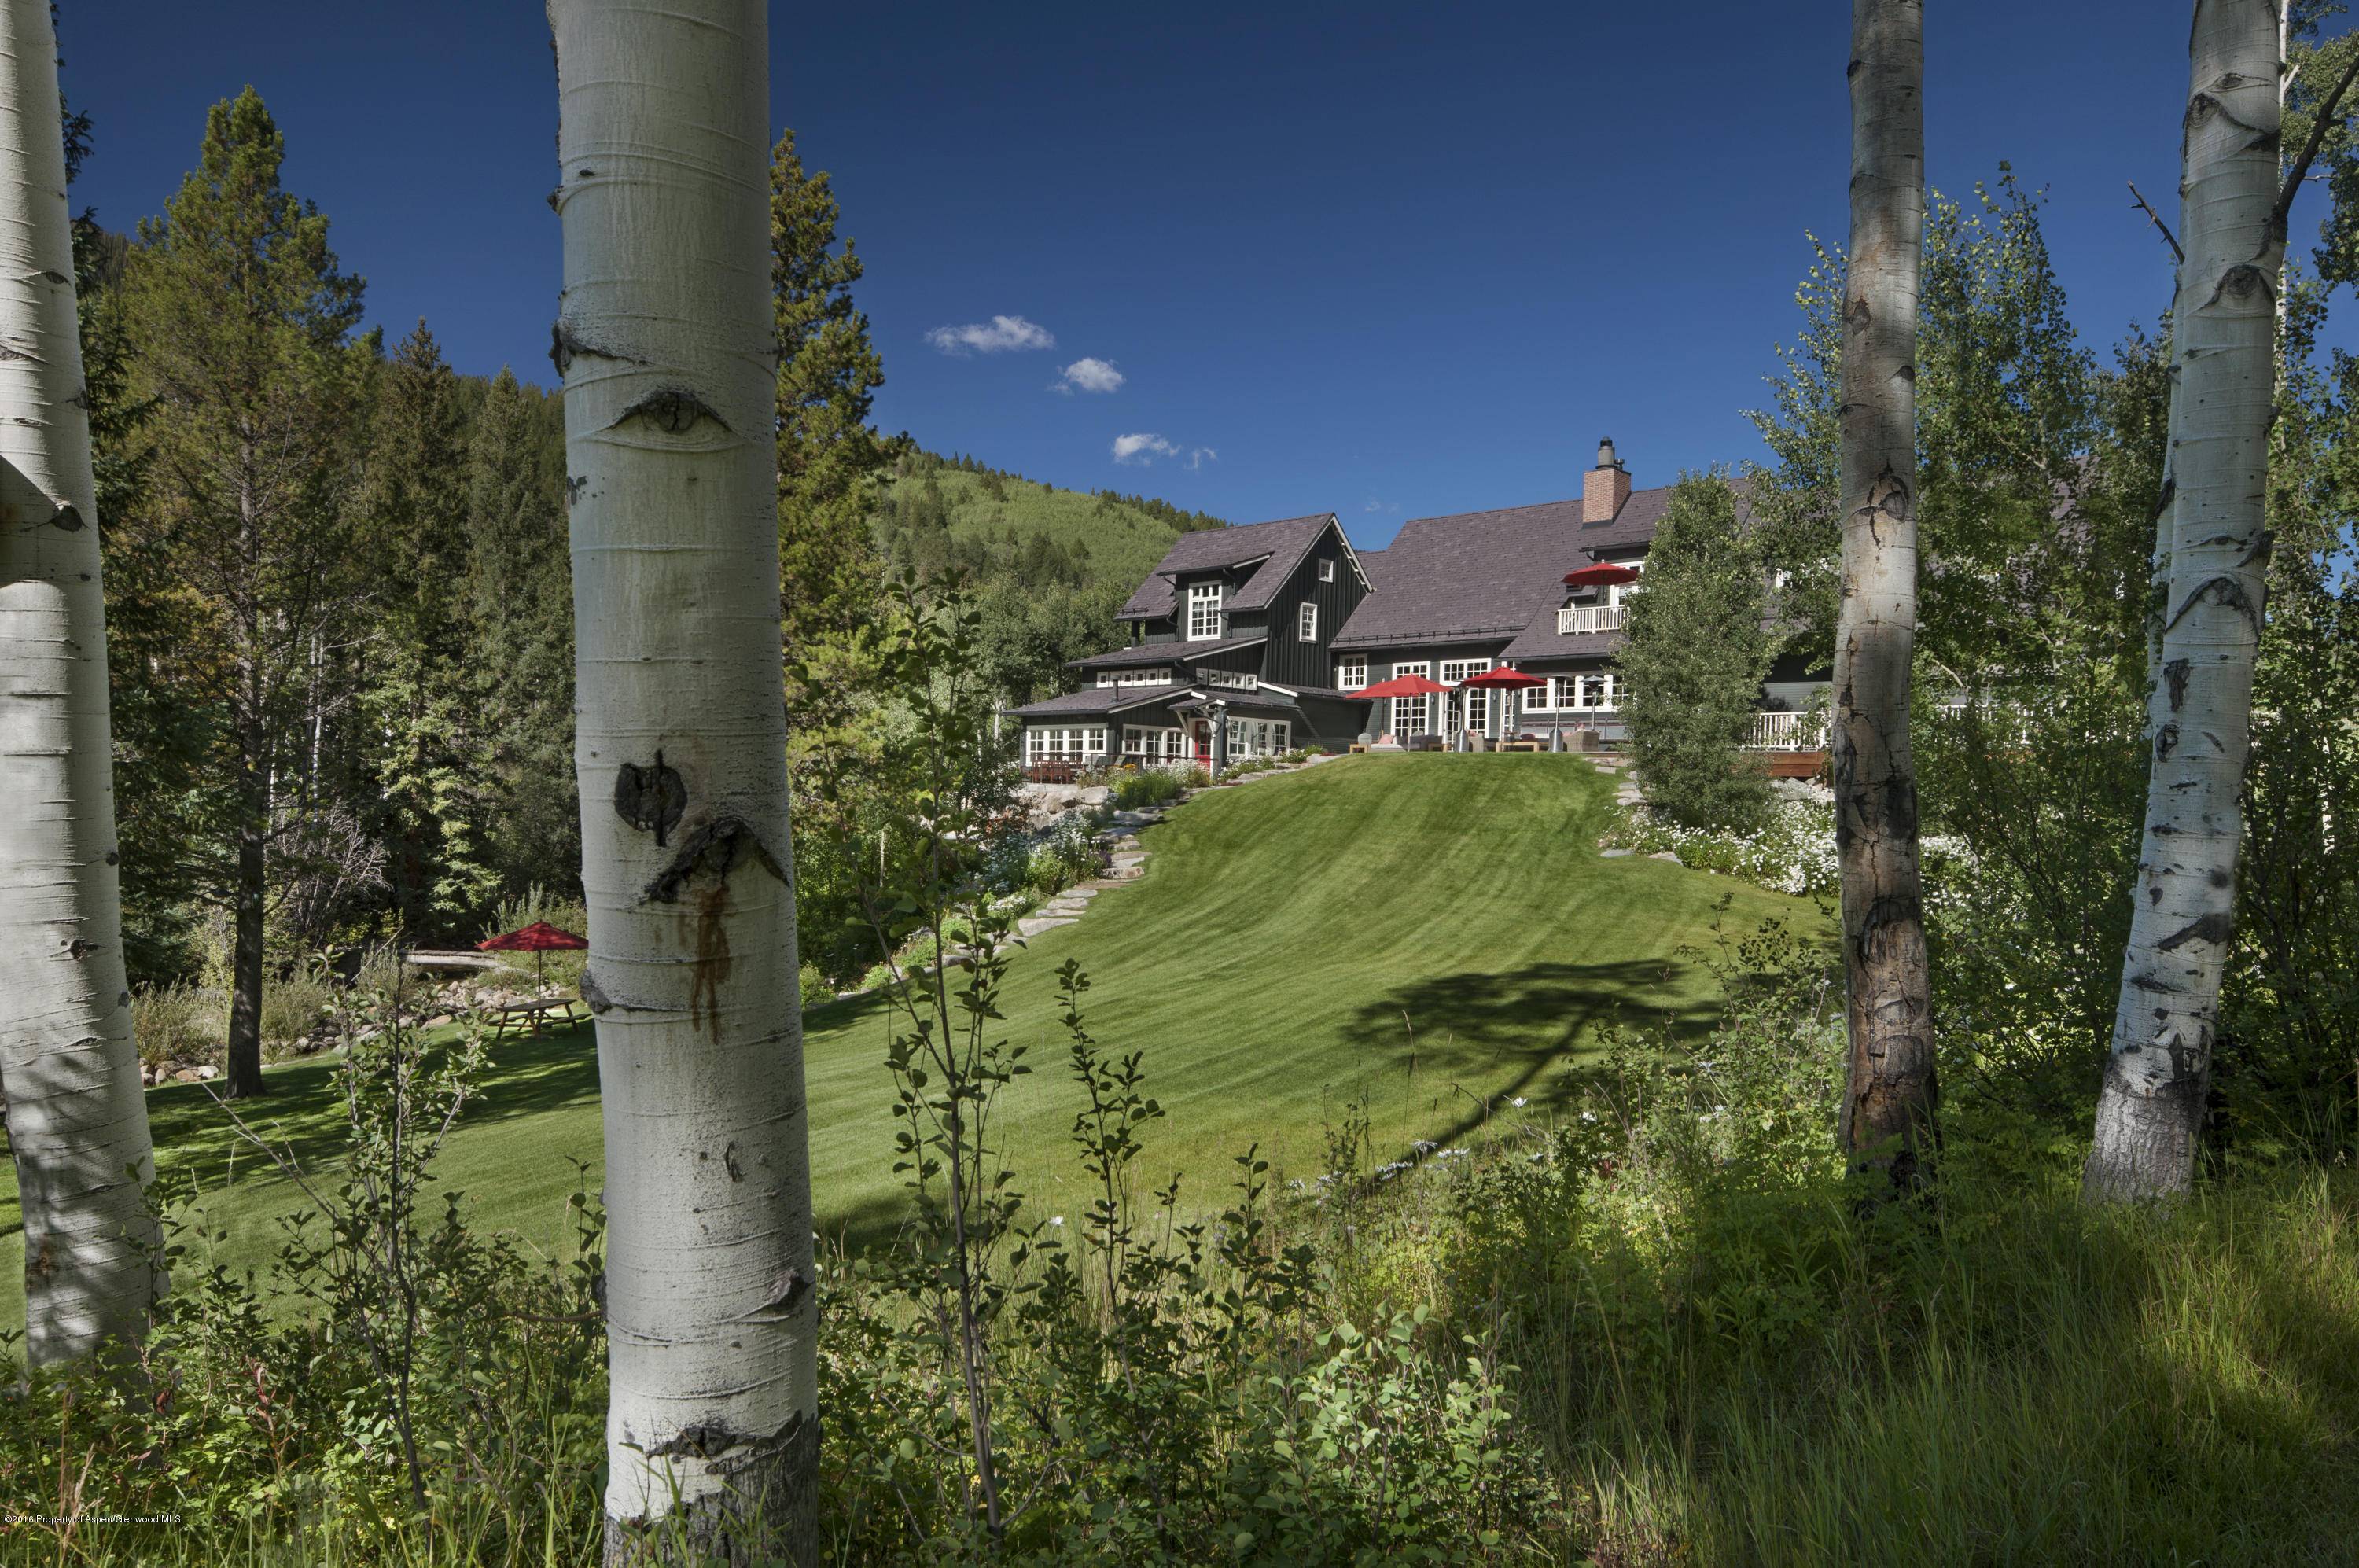 Located in serene seclusion yet only minutes away from downtown Aspen, this one hundred and sixty acre ranch is now available to rent for the first time.